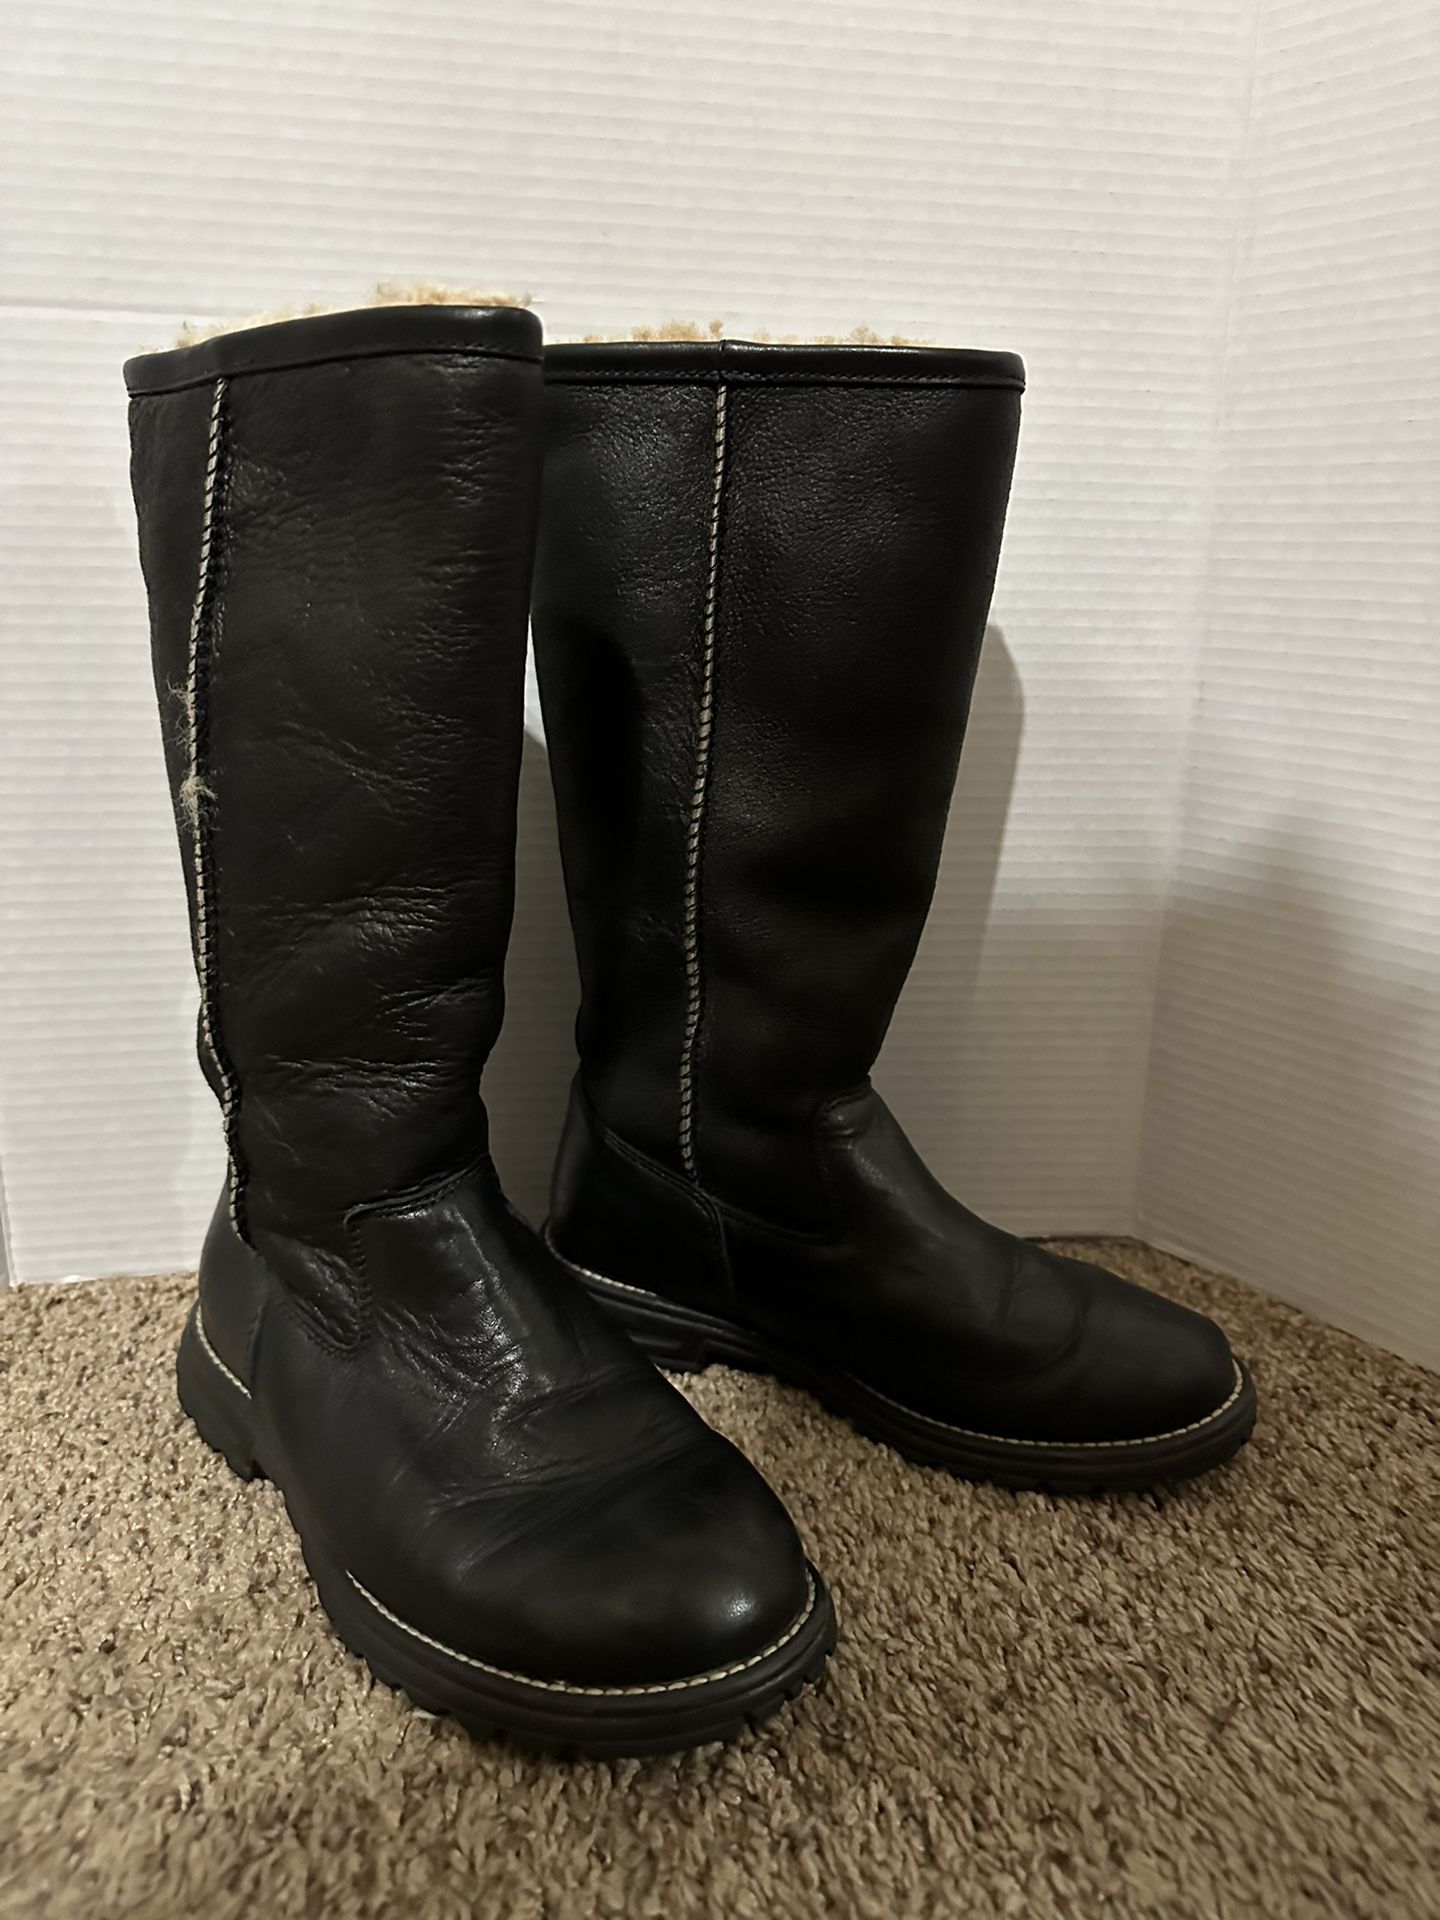 Ugg, Size 6 Black Leather Boots